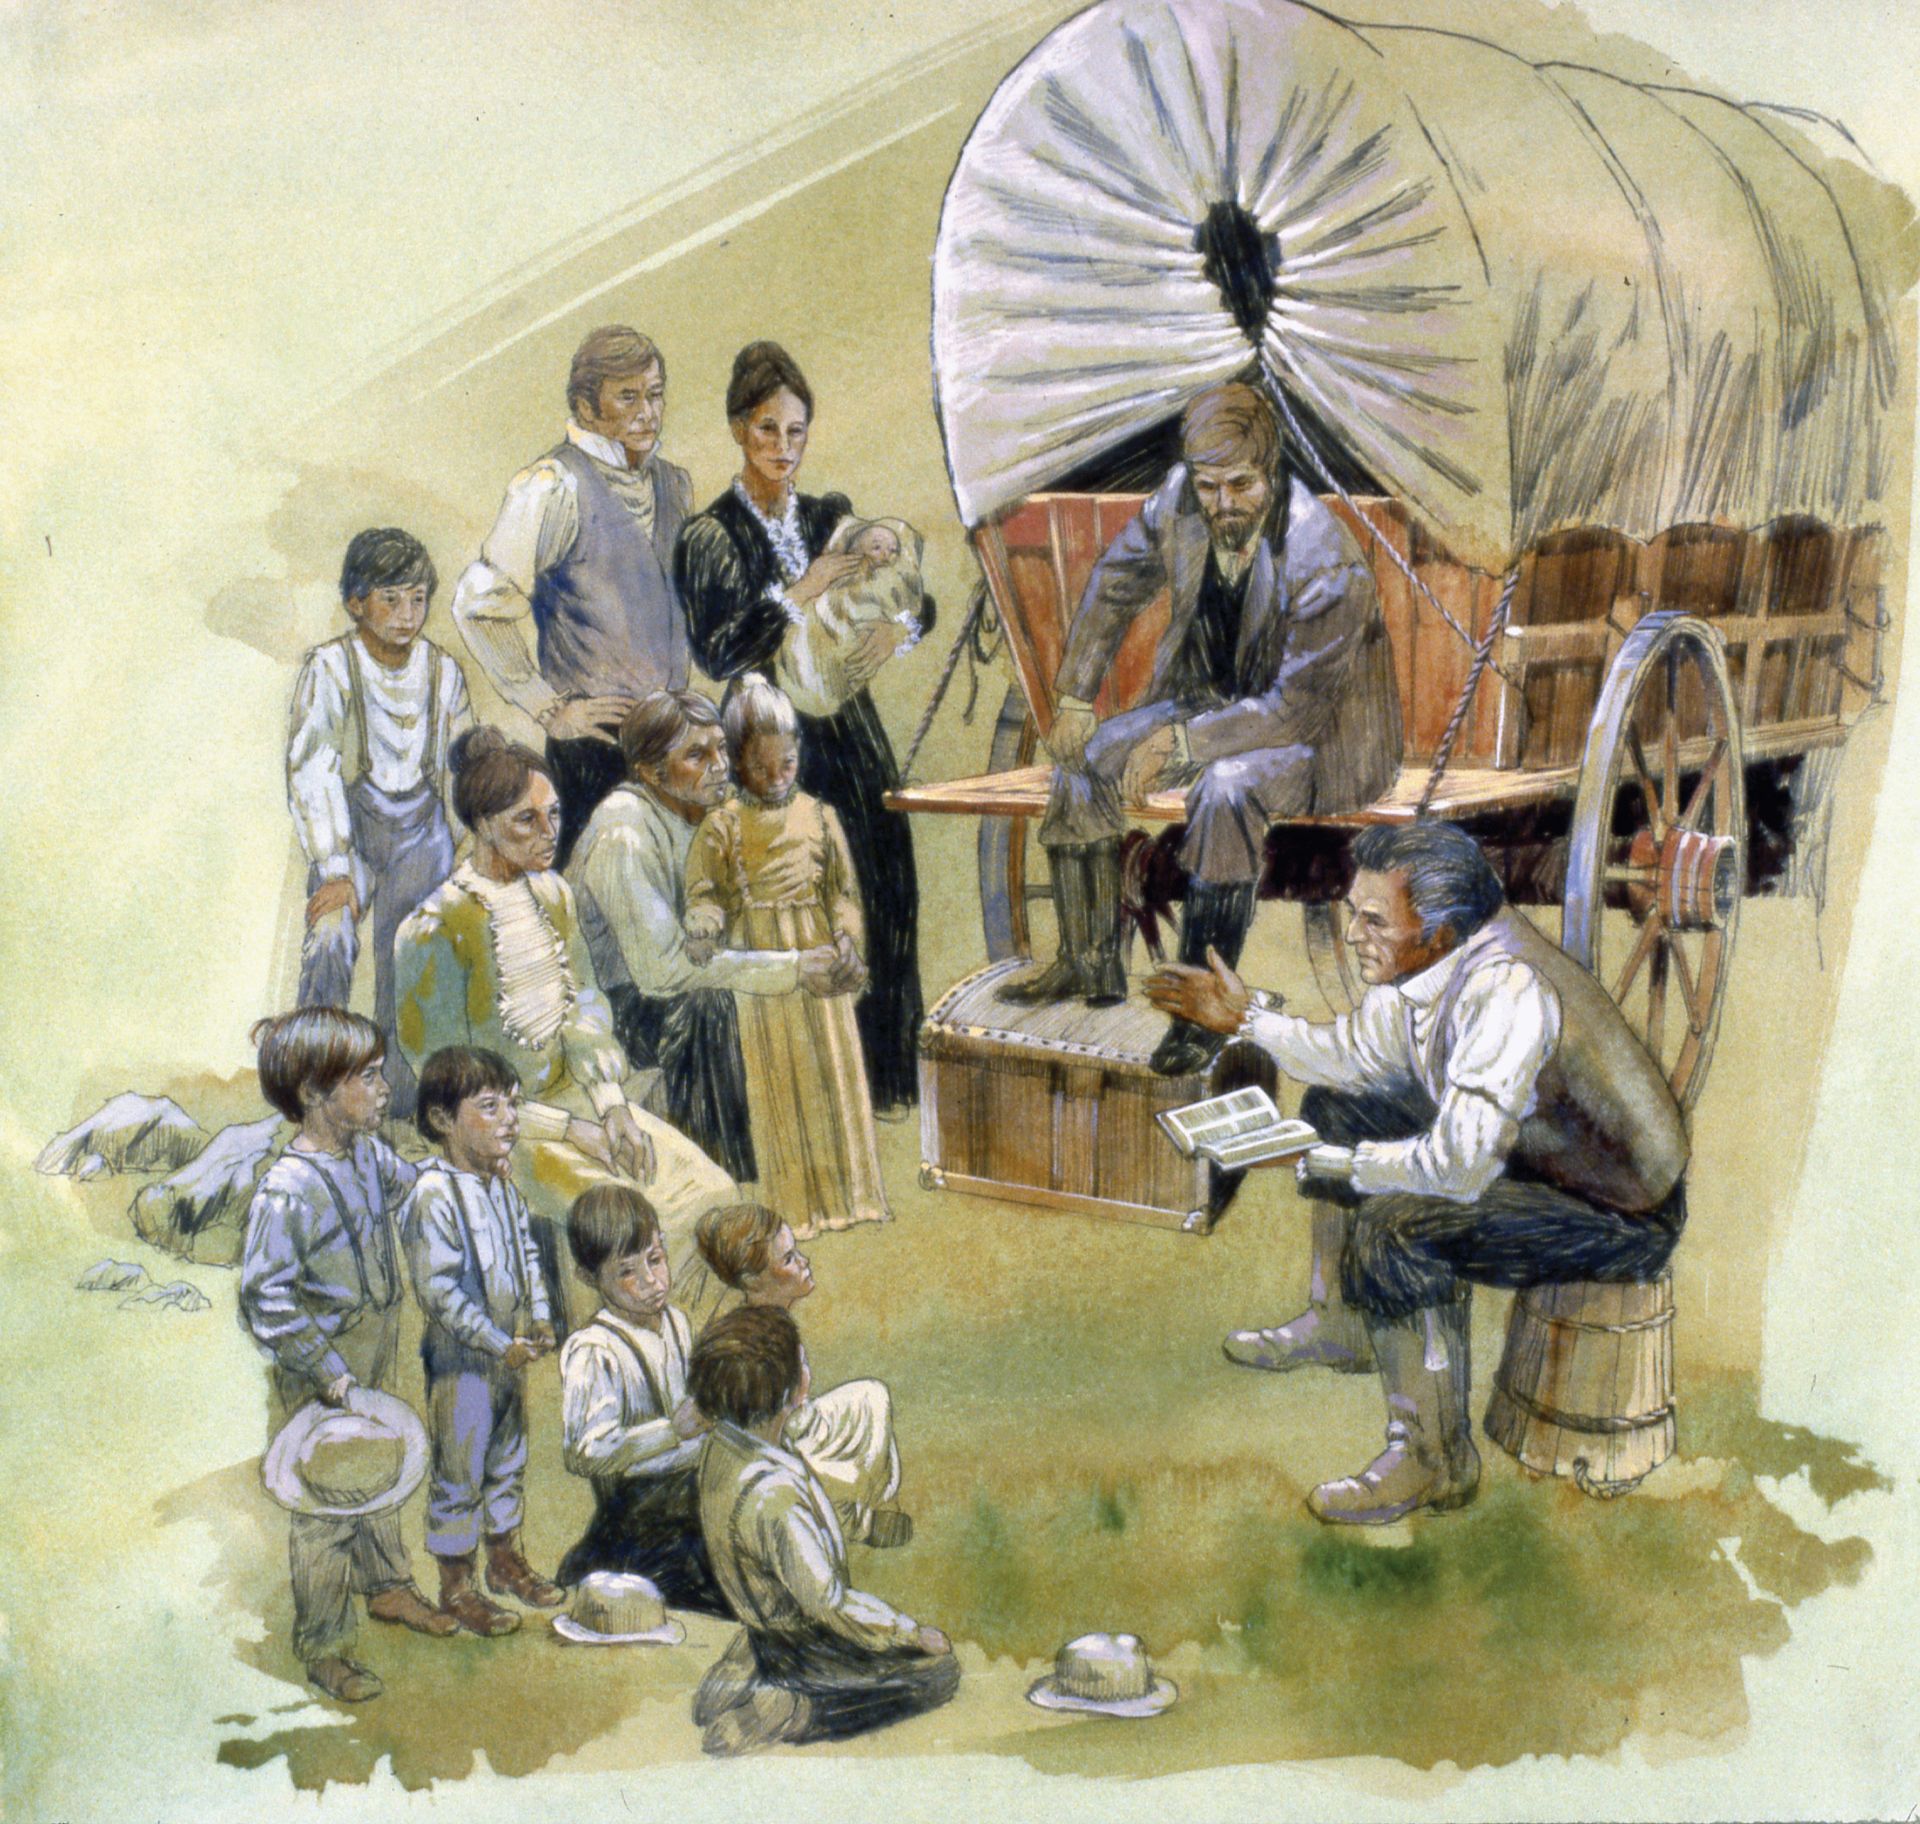 Scripture Study on the Plains, by Lyle Beddes